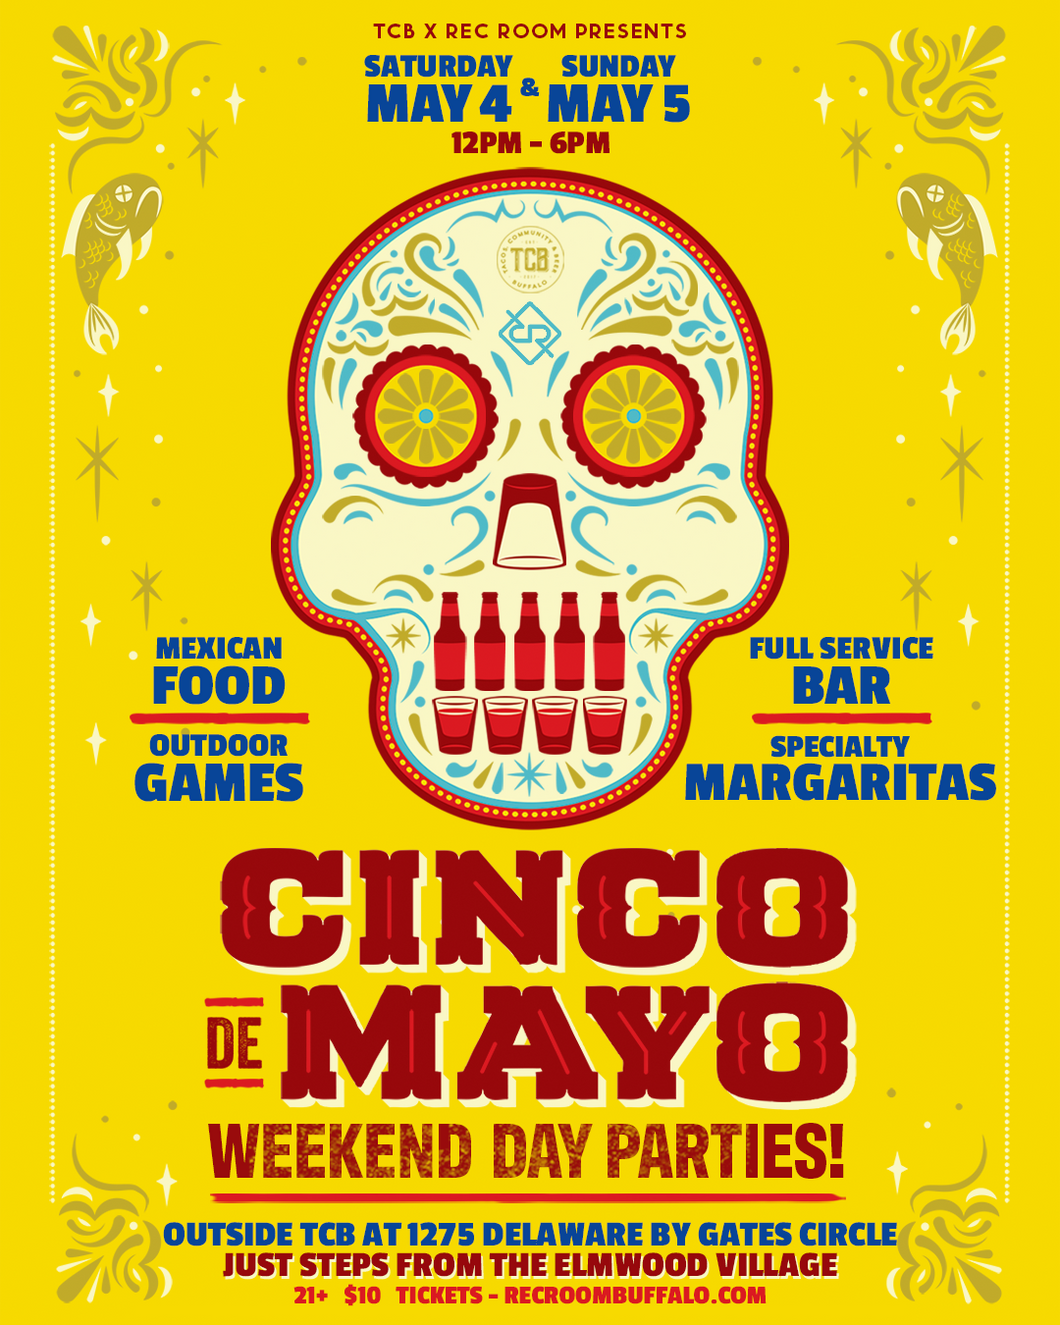 Cinco De Mayo Weekend Day Parties at TCB!